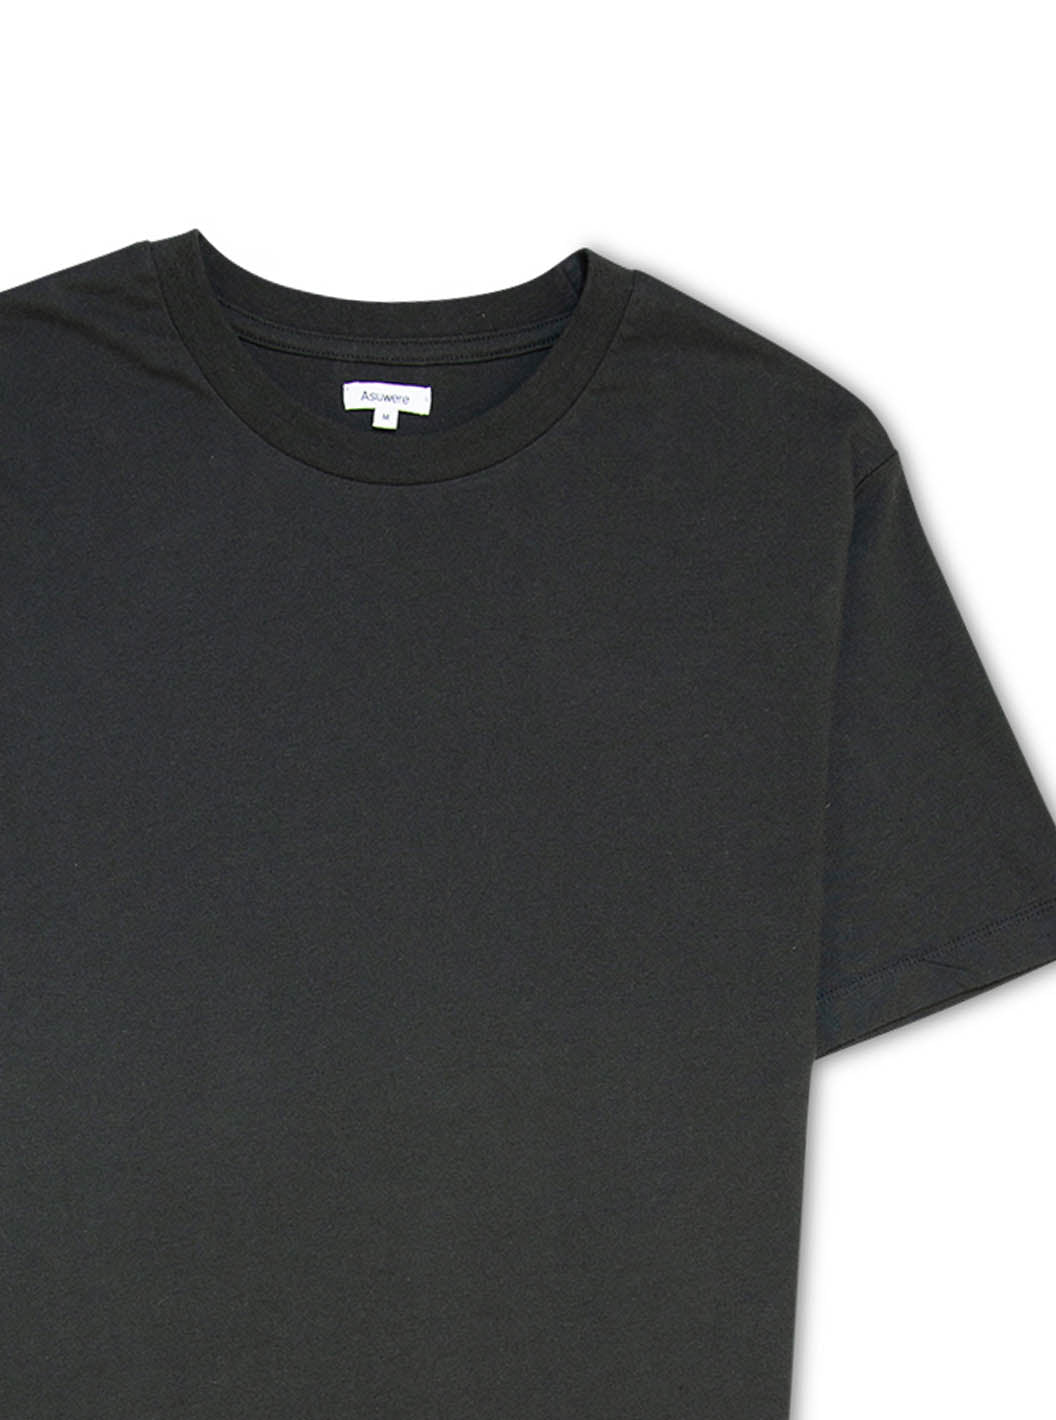 Recycled Cotton Tee - Aged Black